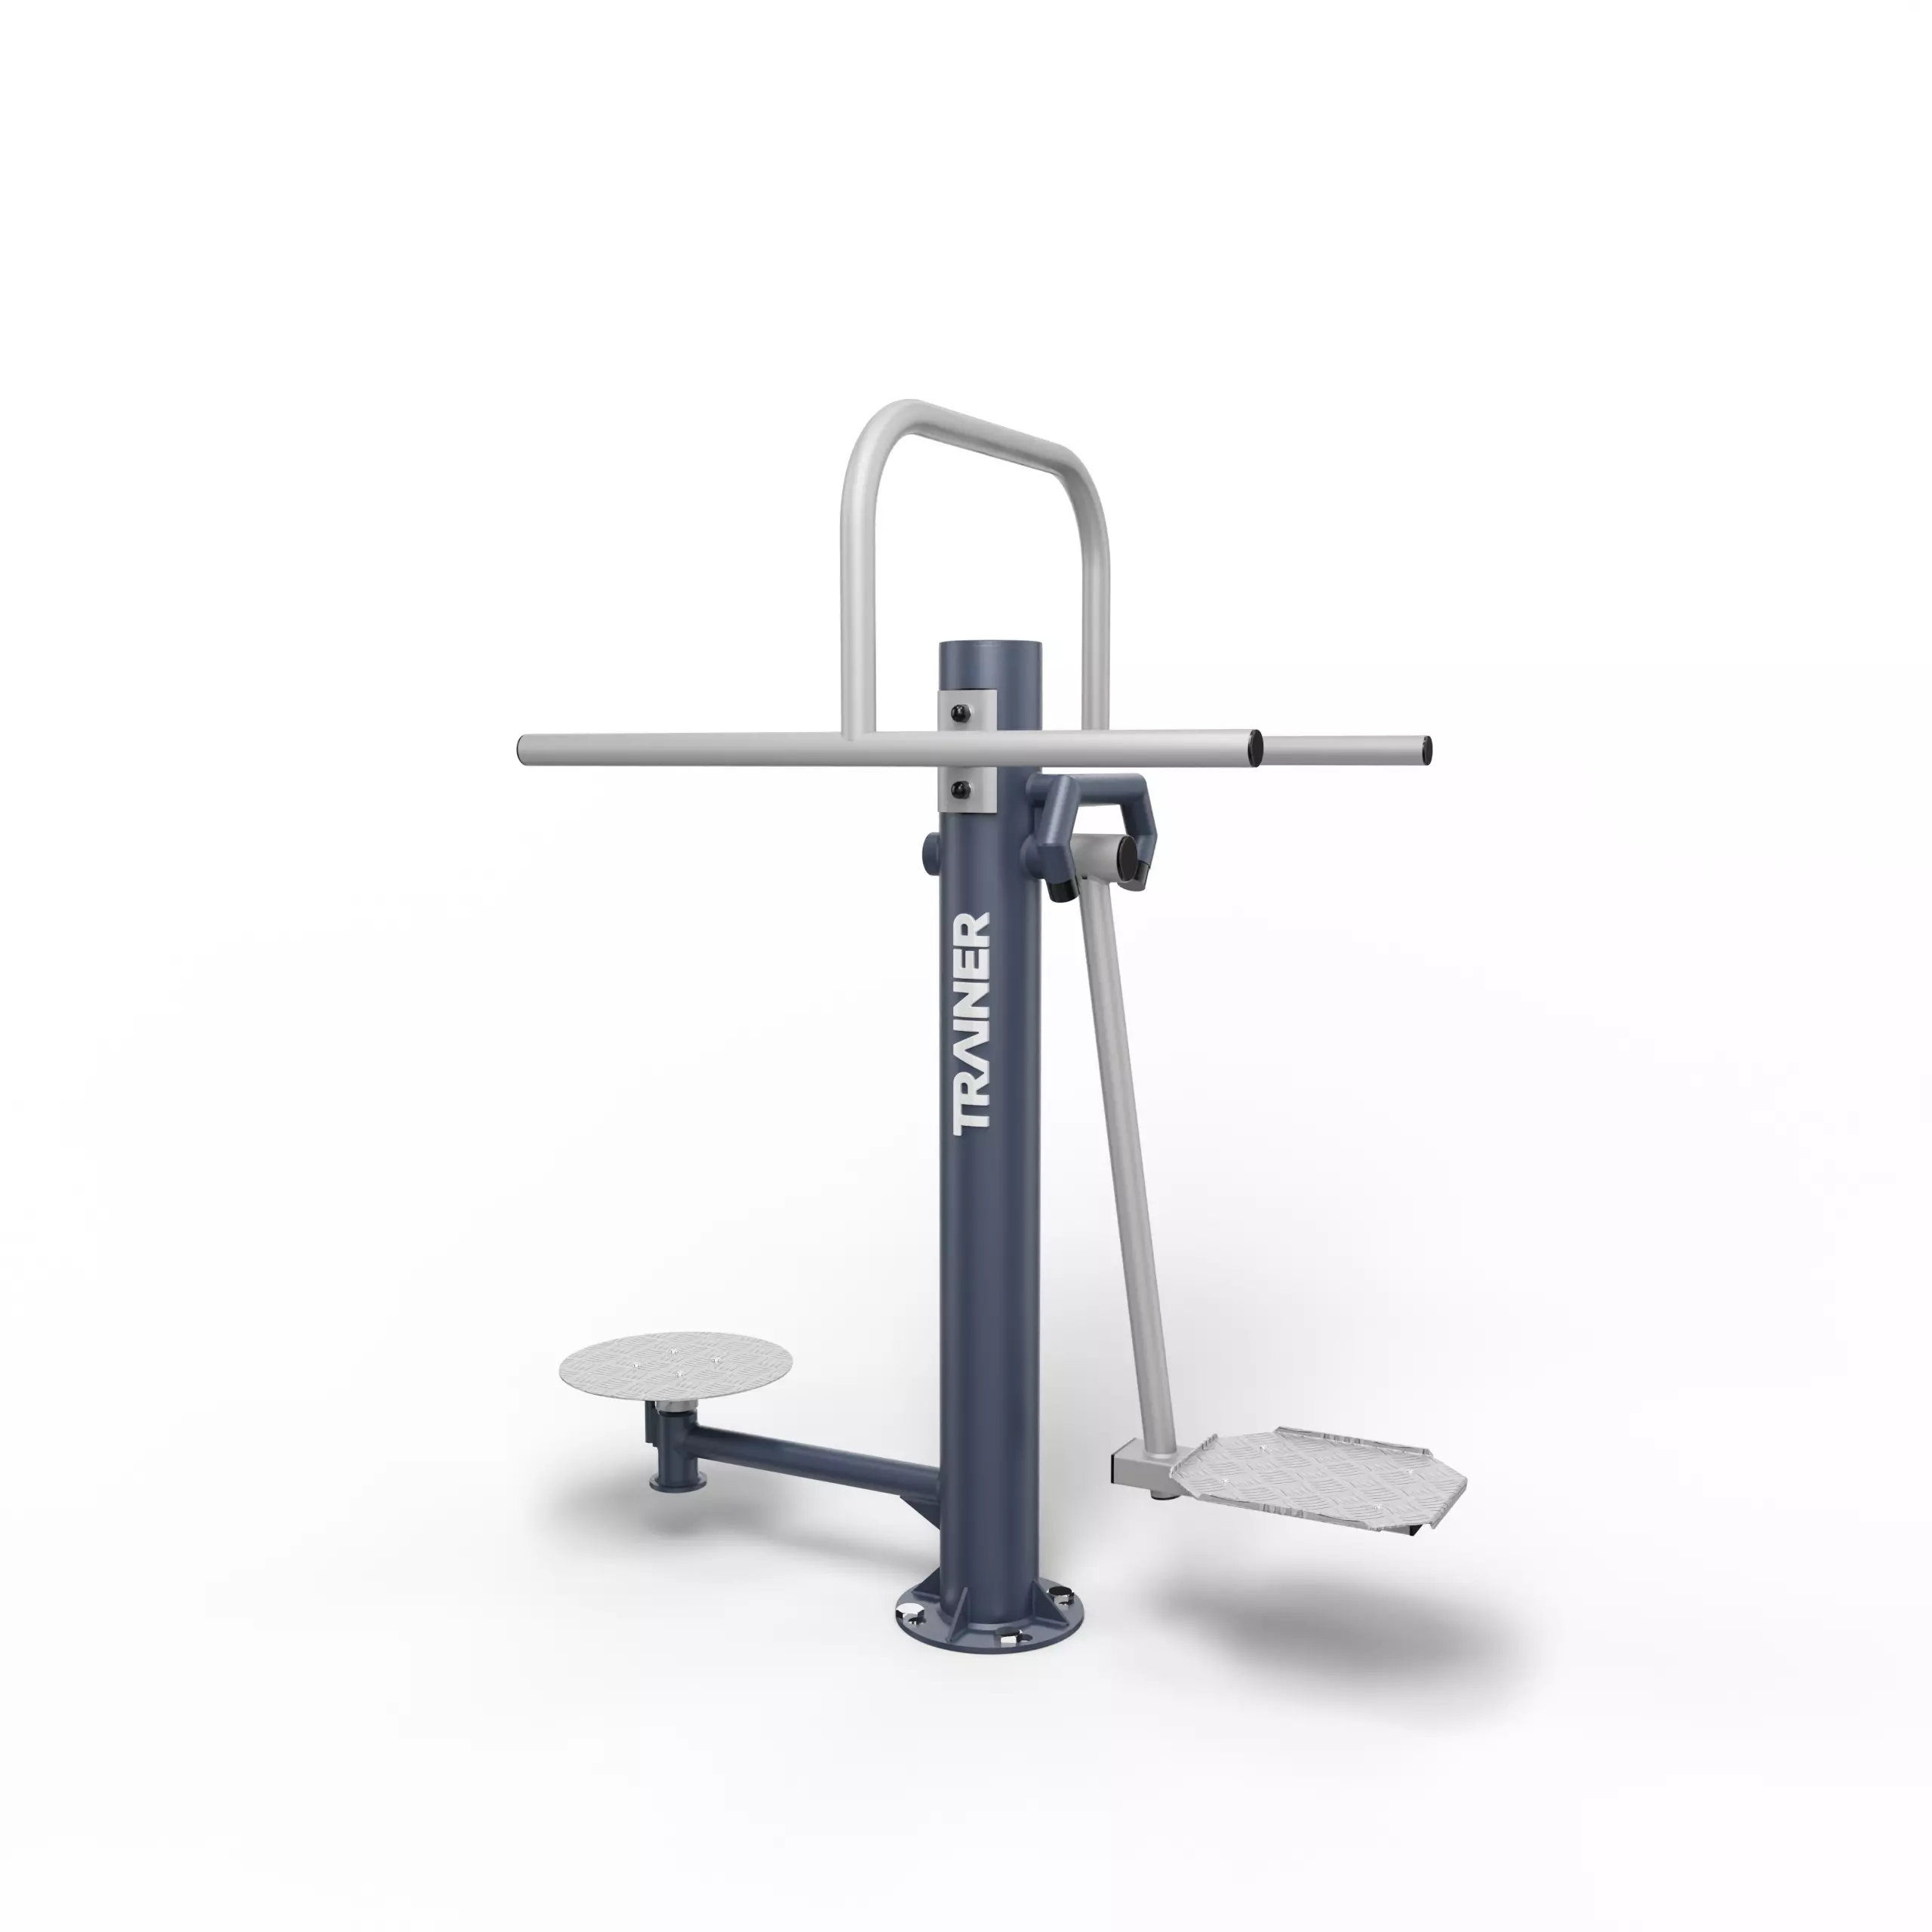 Outdoor gym and outdoor fitness equipment